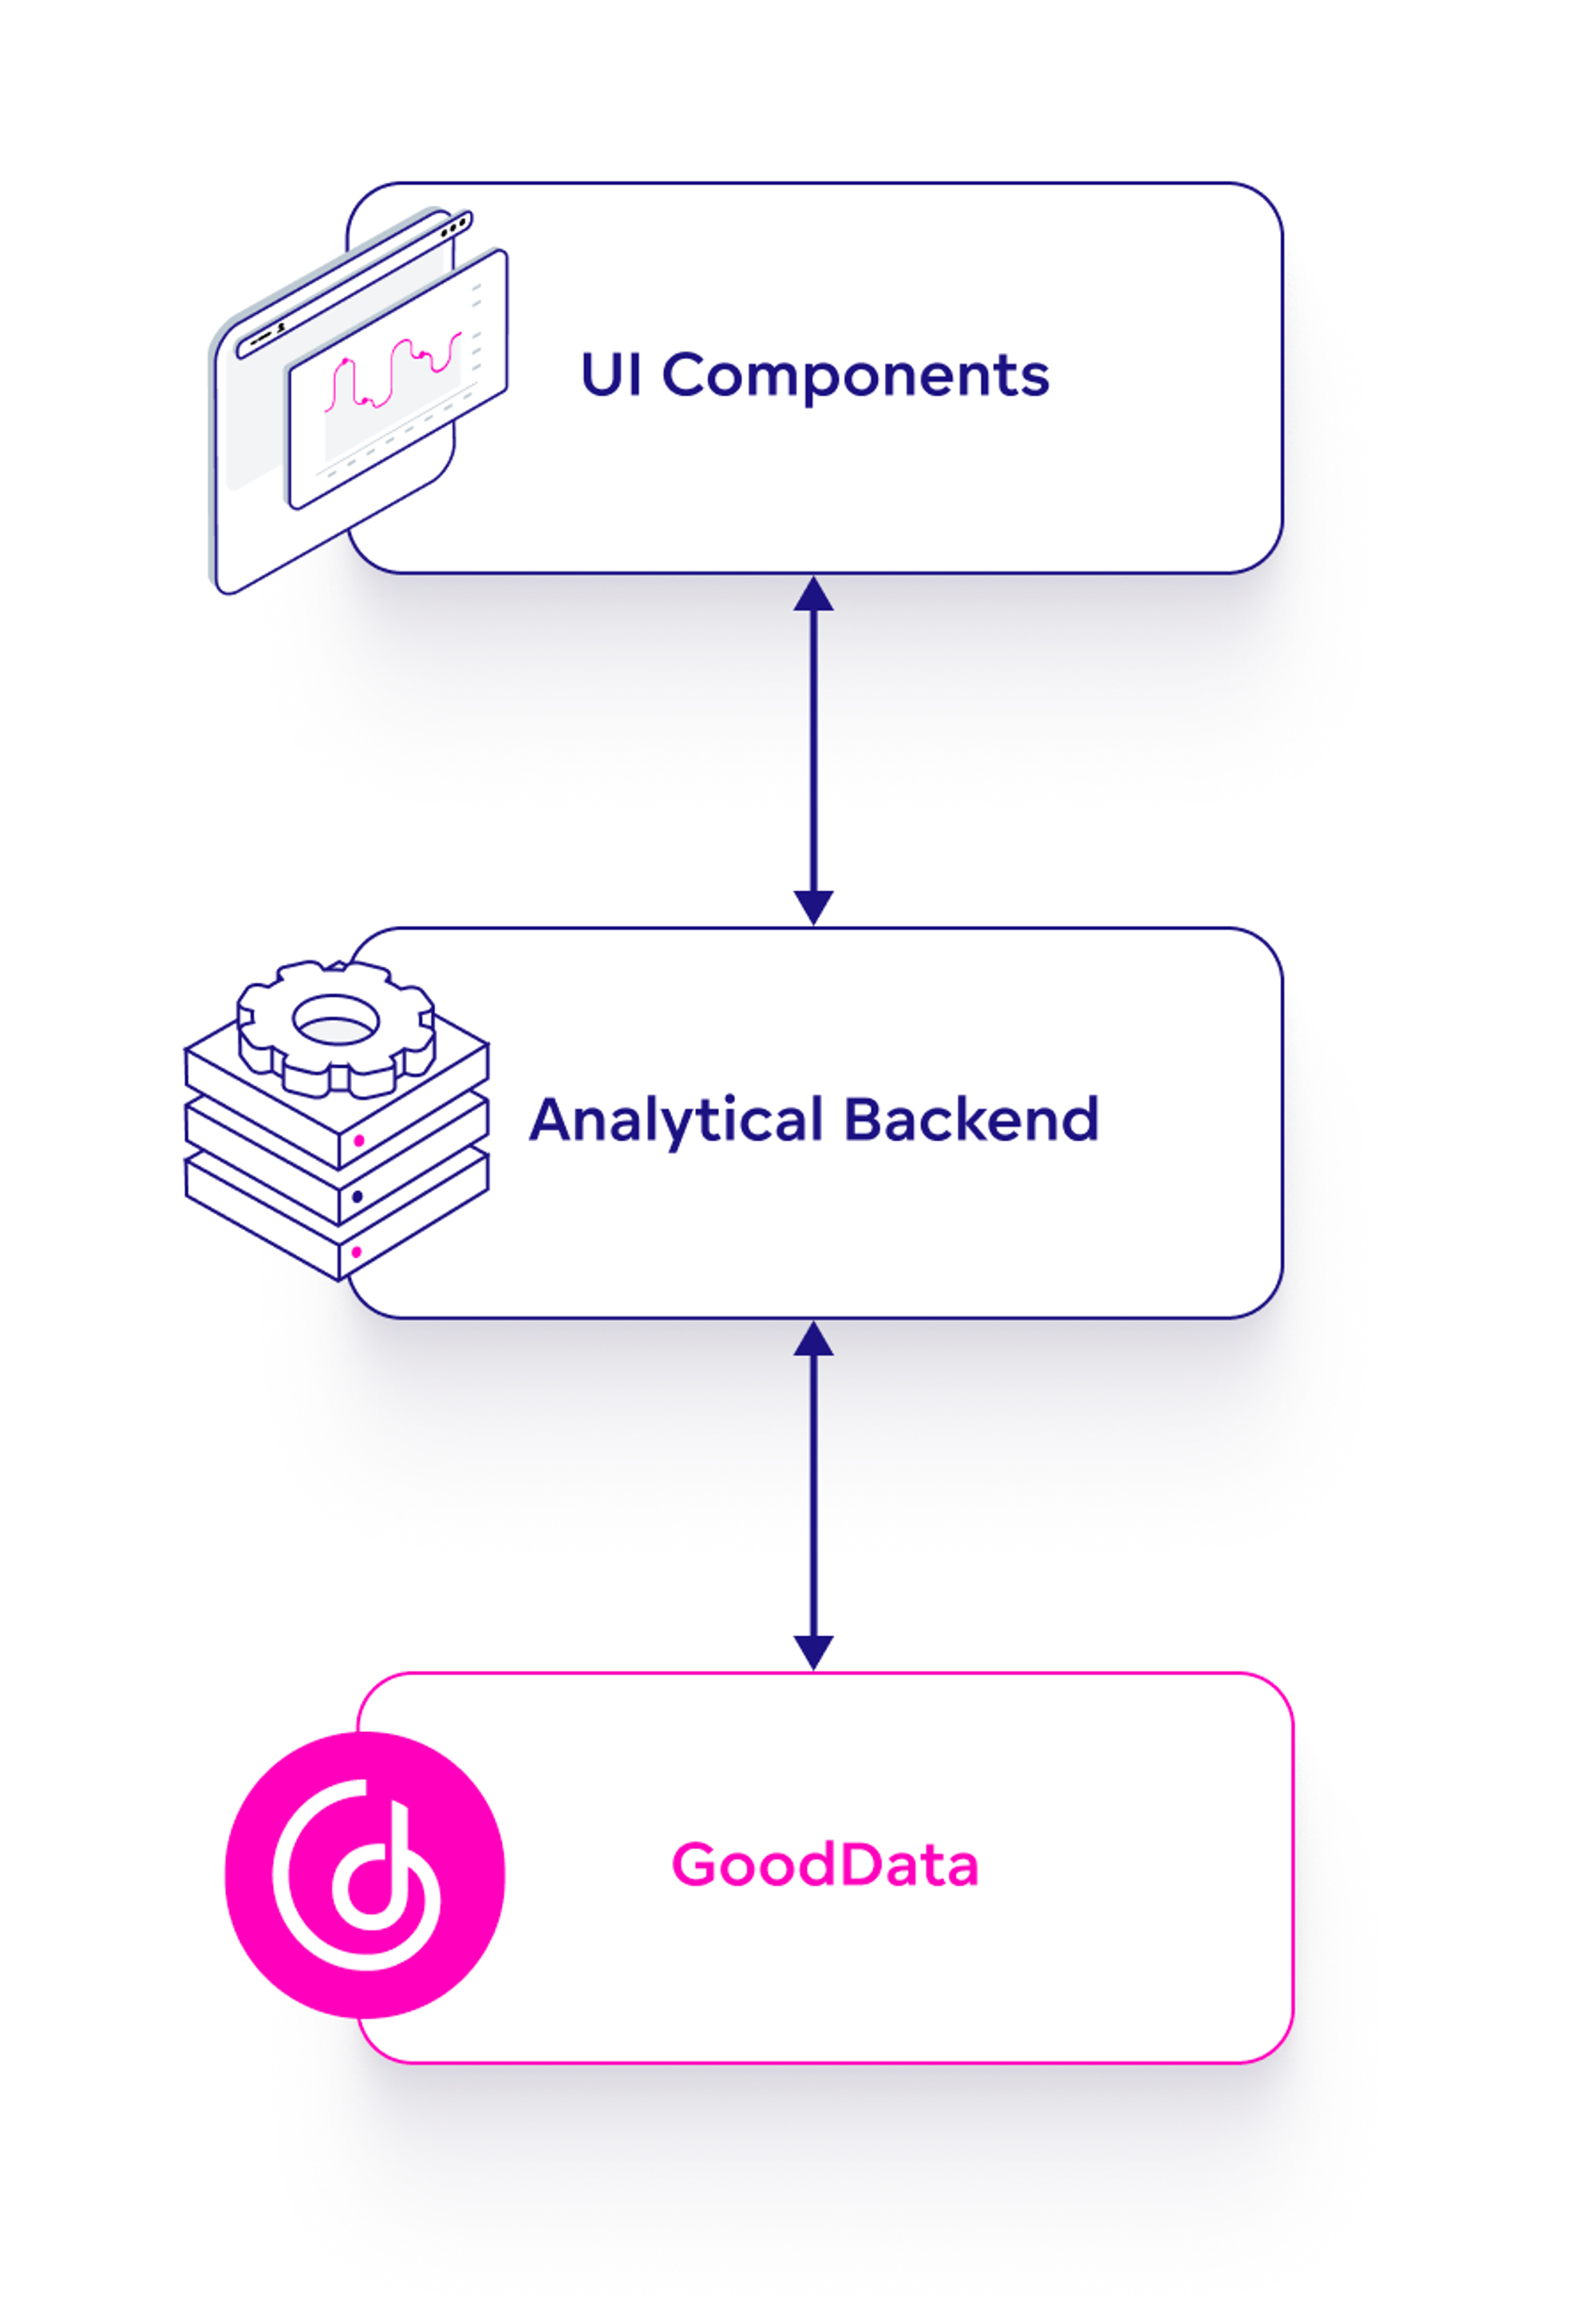 The Second level of Architecture Abstraction of GoodData.UI